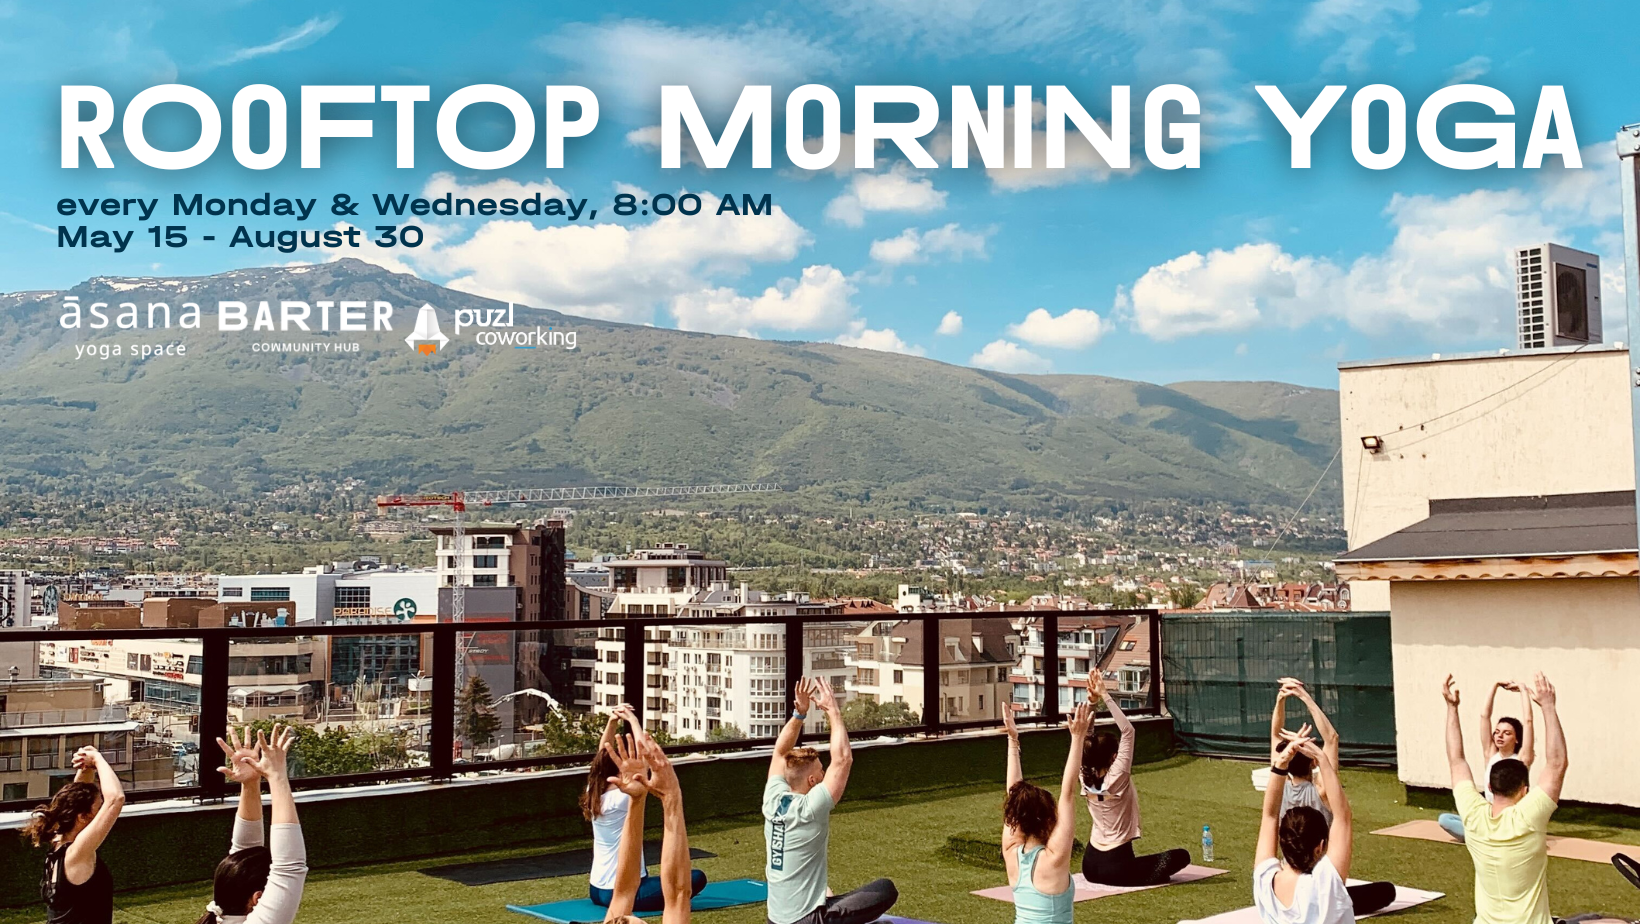 Rooftop morning yoga sessions at Barter Community Hub